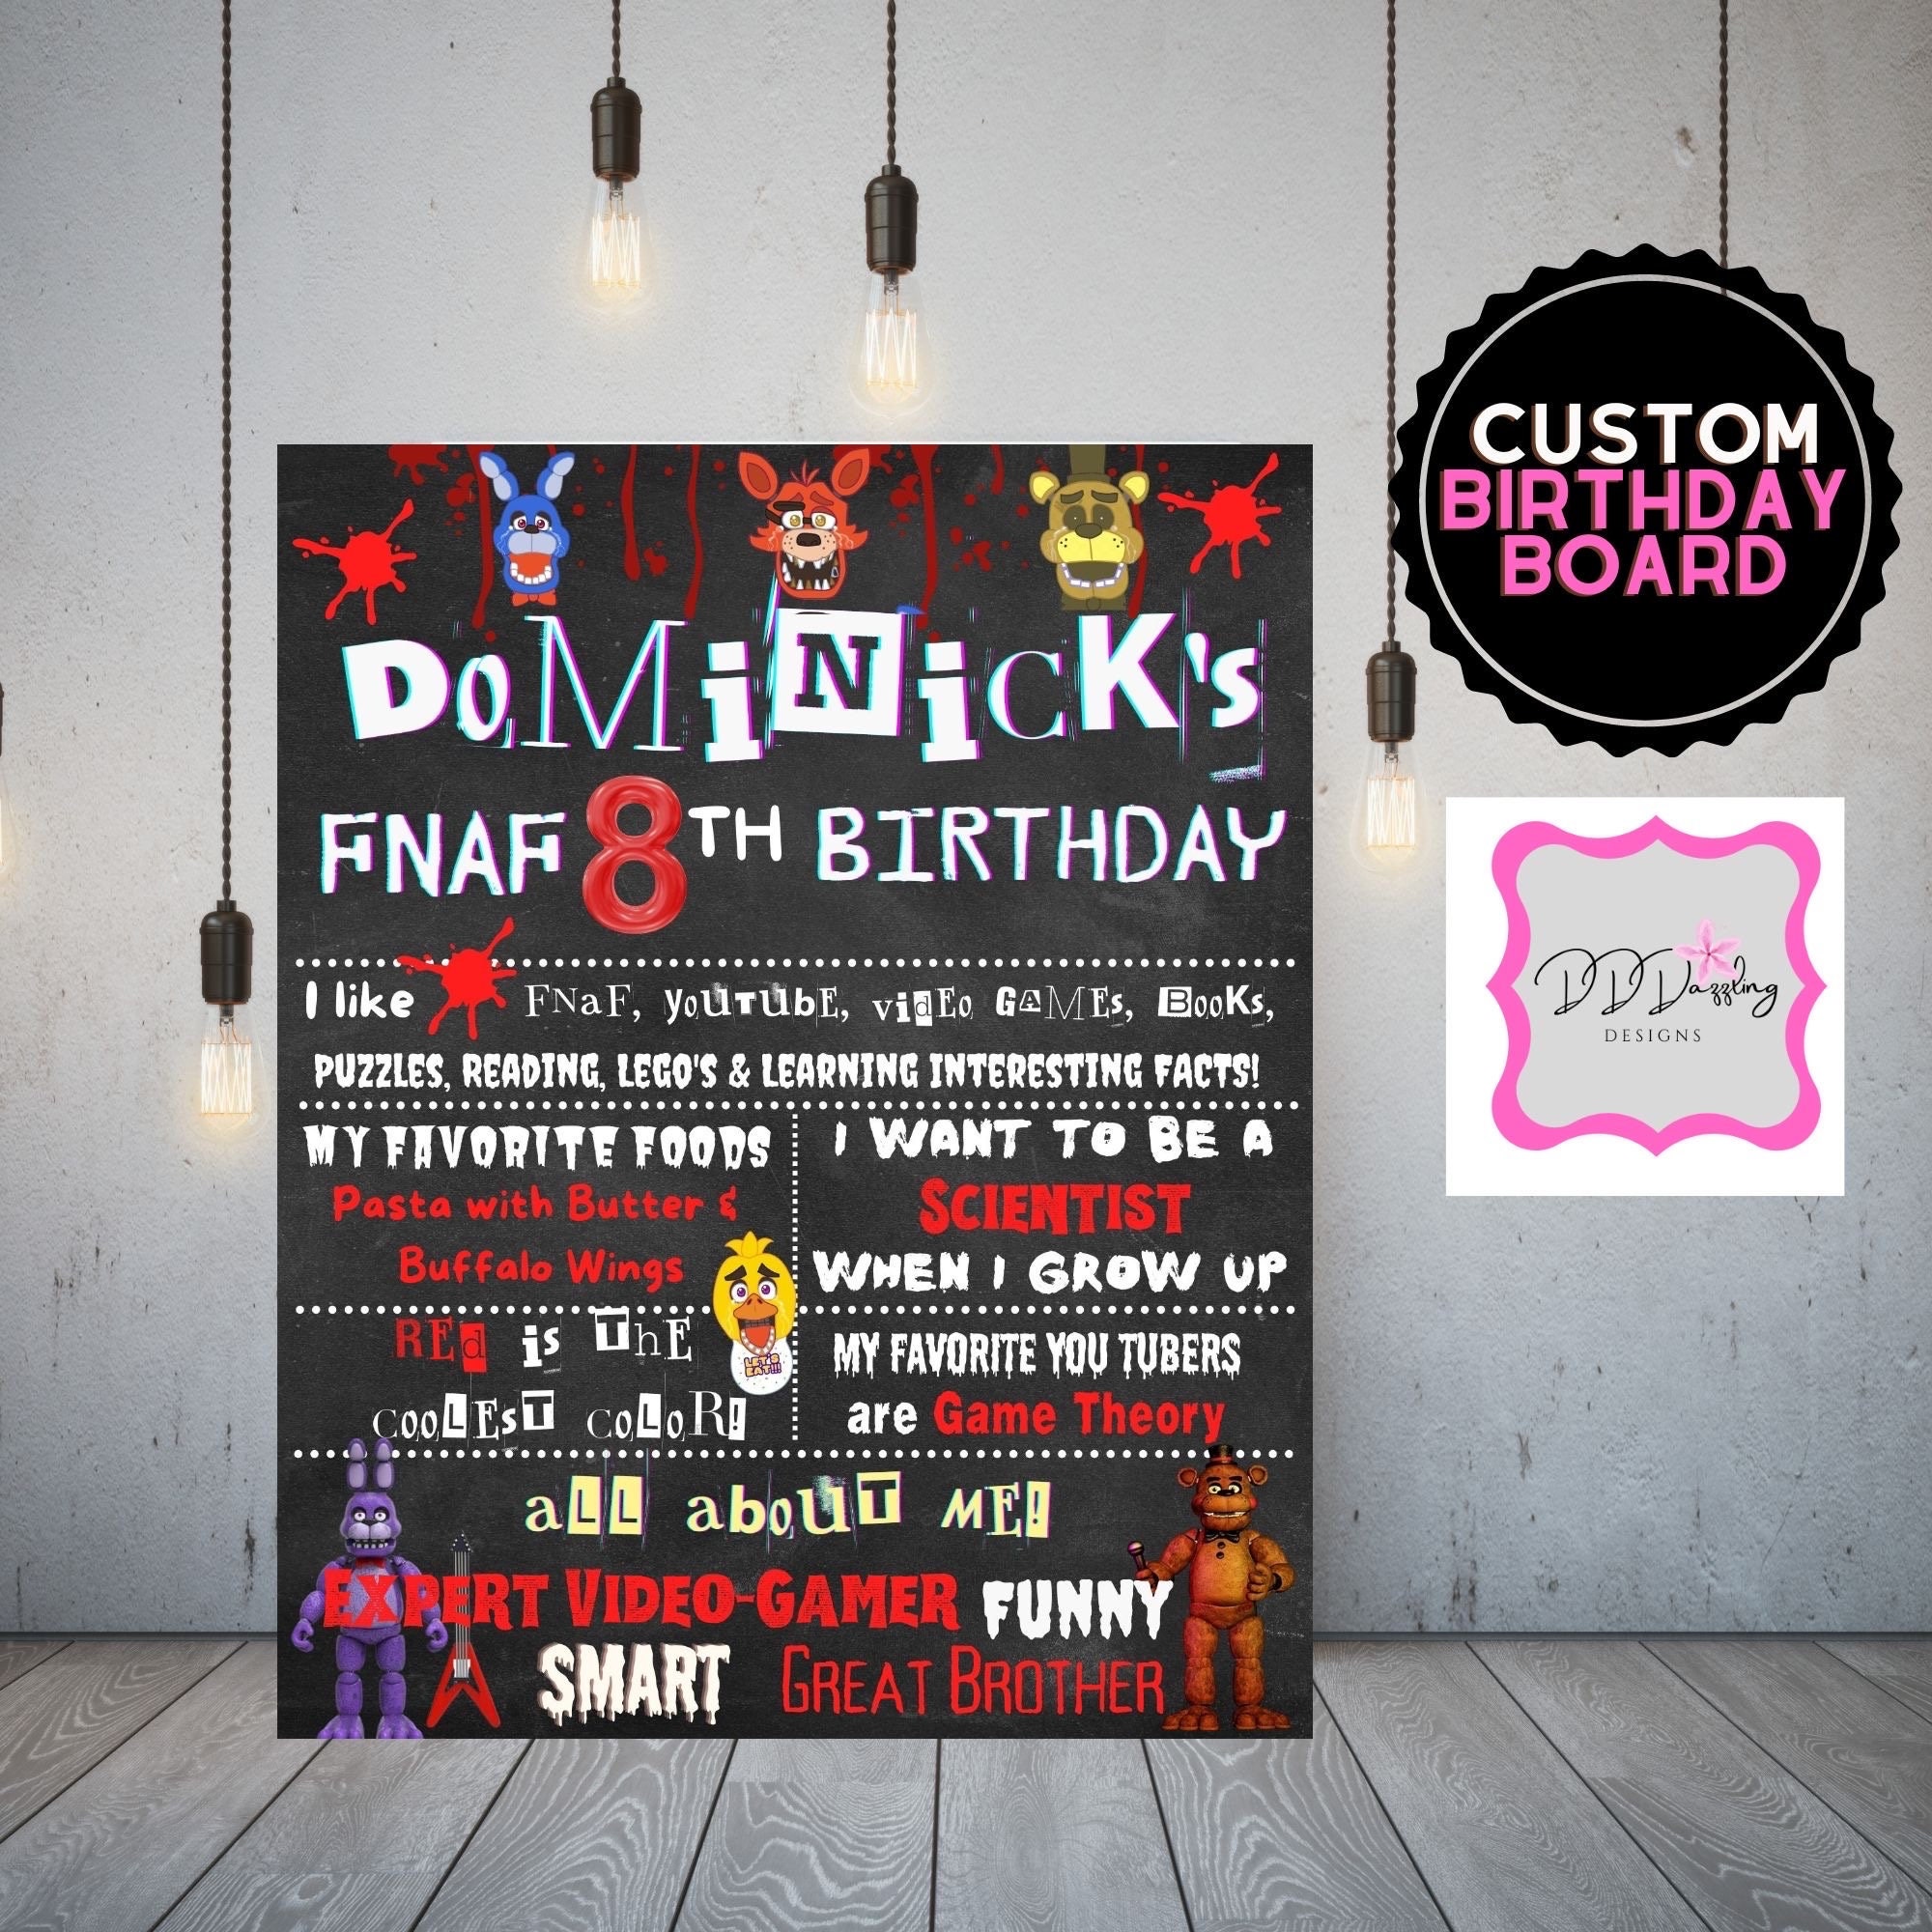 Five Nights at Freddy's Happy Birthday Sign - FNAF Birthday Banner - 5  Nights Freddy's Party - 5 Nights Freddy's Video Game Party 100817